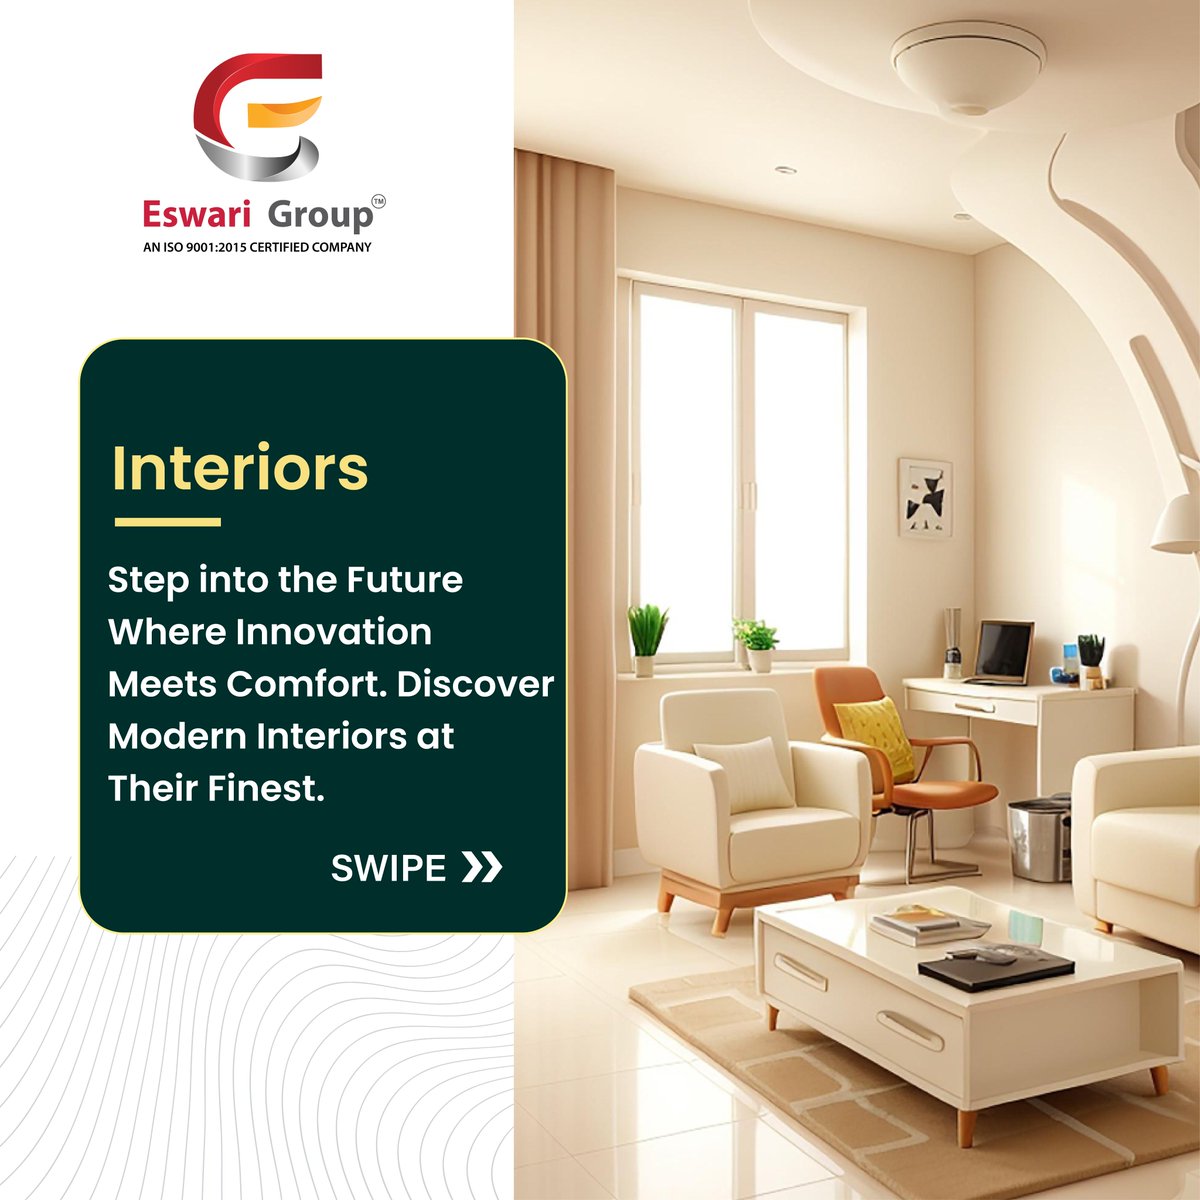 Get to know what's shaping the future of construction innovation?

> Building dreams, one click at a time!
> Elevating spaces
> Discover modern interior

Phone: 9666696889
Website:eswarigroup.com
.
#innovation #design #eswarigroup #construction #architecture #interiors